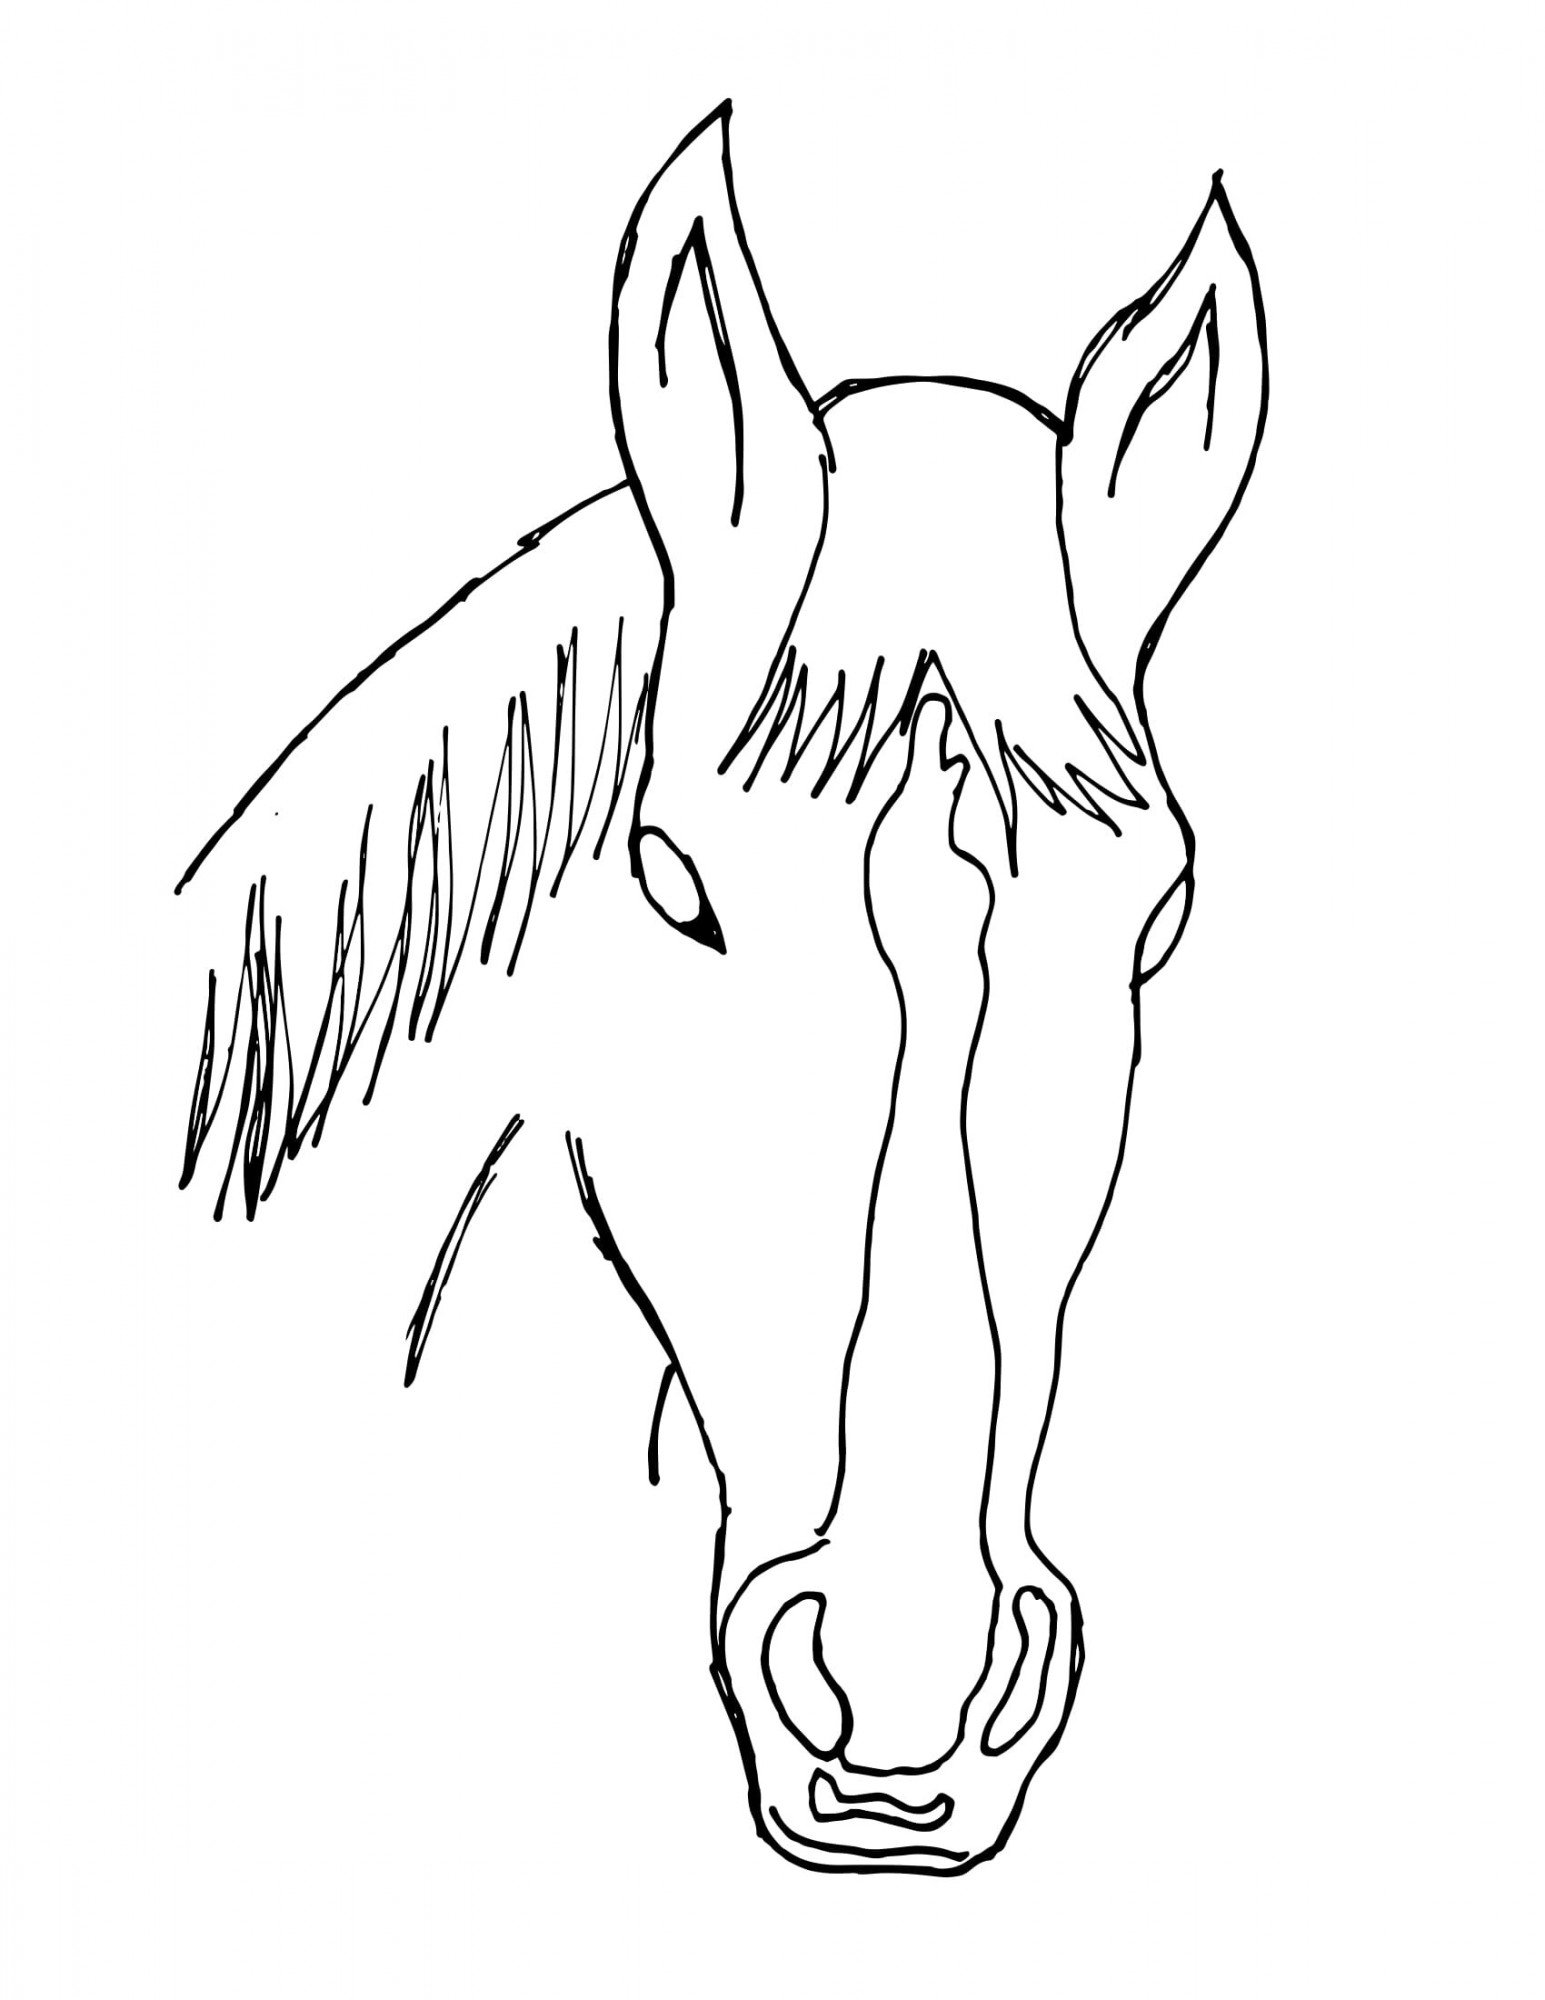 Horse Ali - black and white outline for coloring